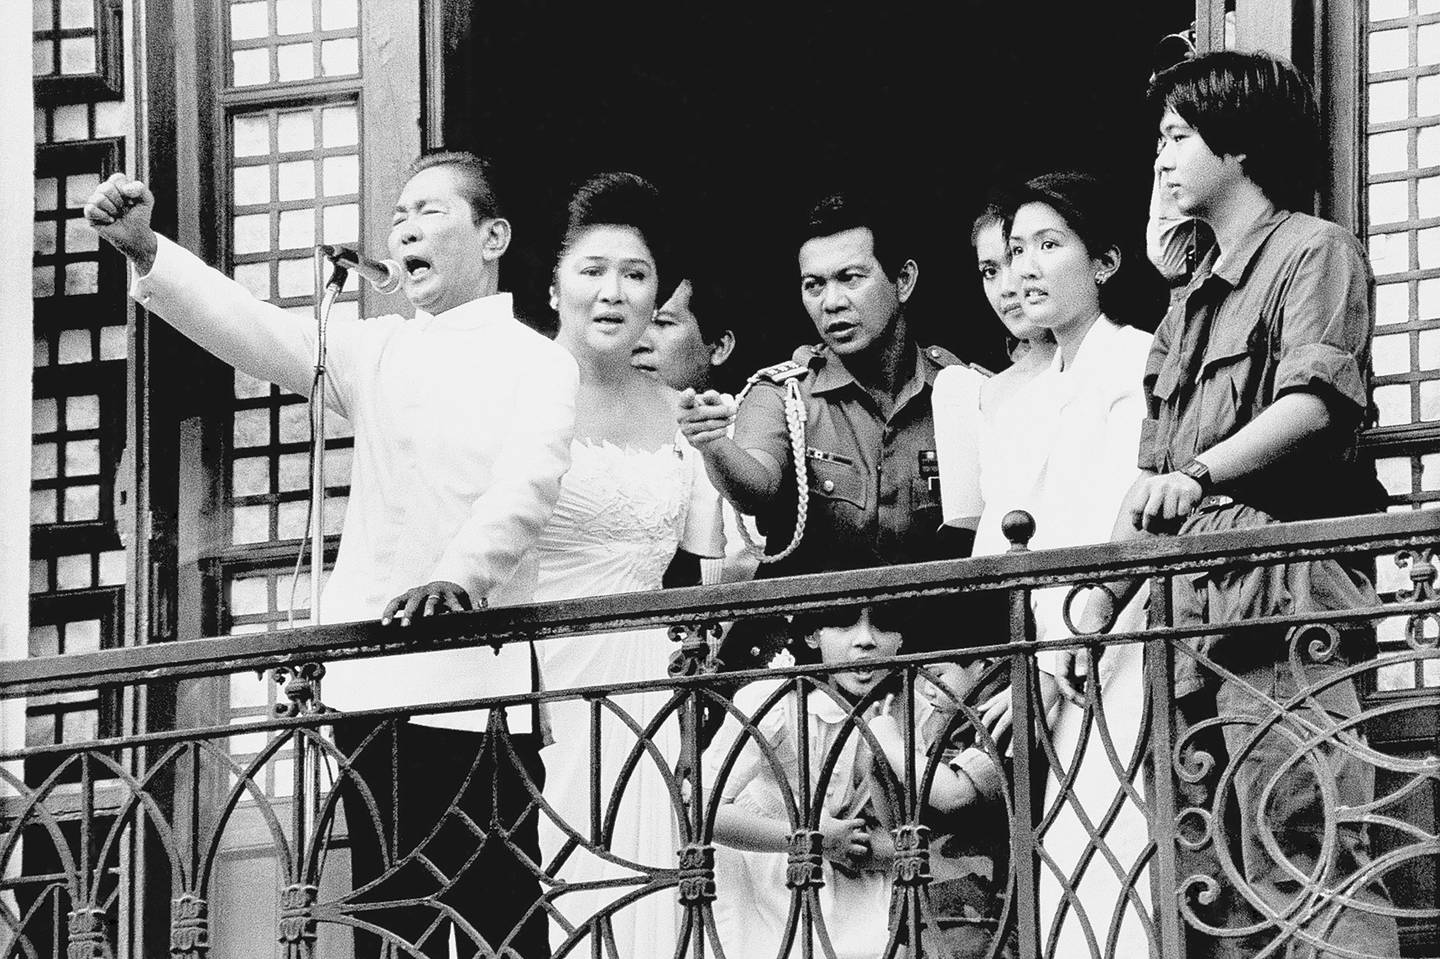 Ferdinand Marcos, with his wife Imelda at his side and Ferdinand Marcos Jr, far right, on the balcony of Malacanang Palace in February 1986 in Manila, soon after taking the oath of office as president of the Philippines. AP